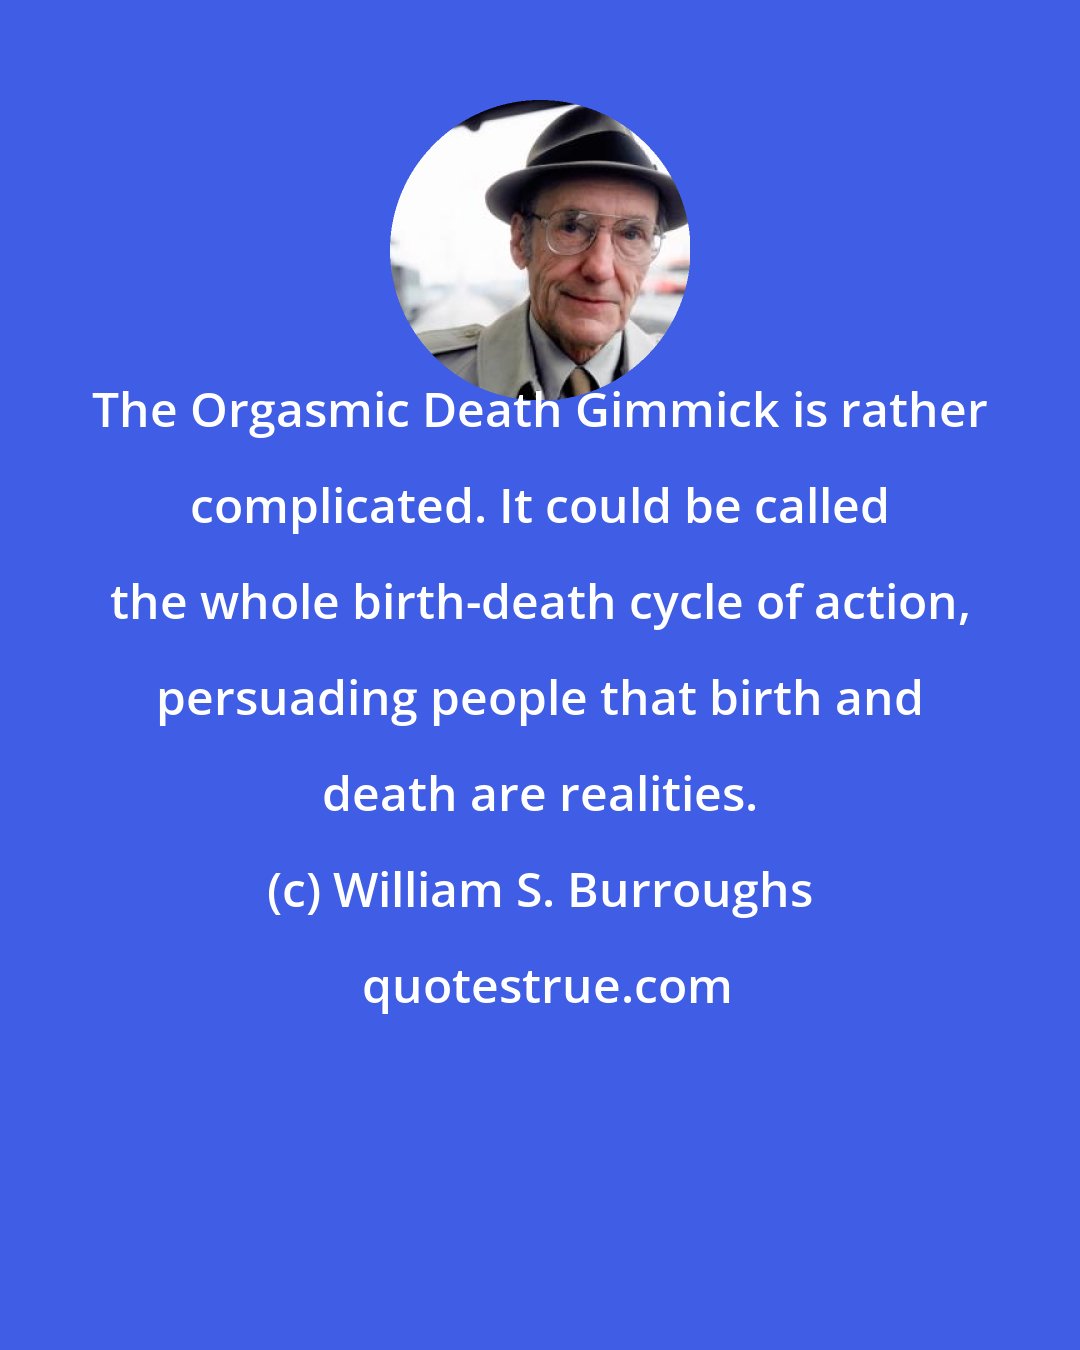 William S. Burroughs: The Orgasmic Death Gimmick is rather complicated. It could be called the whole birth-death cycle of action, persuading people that birth and death are realities.